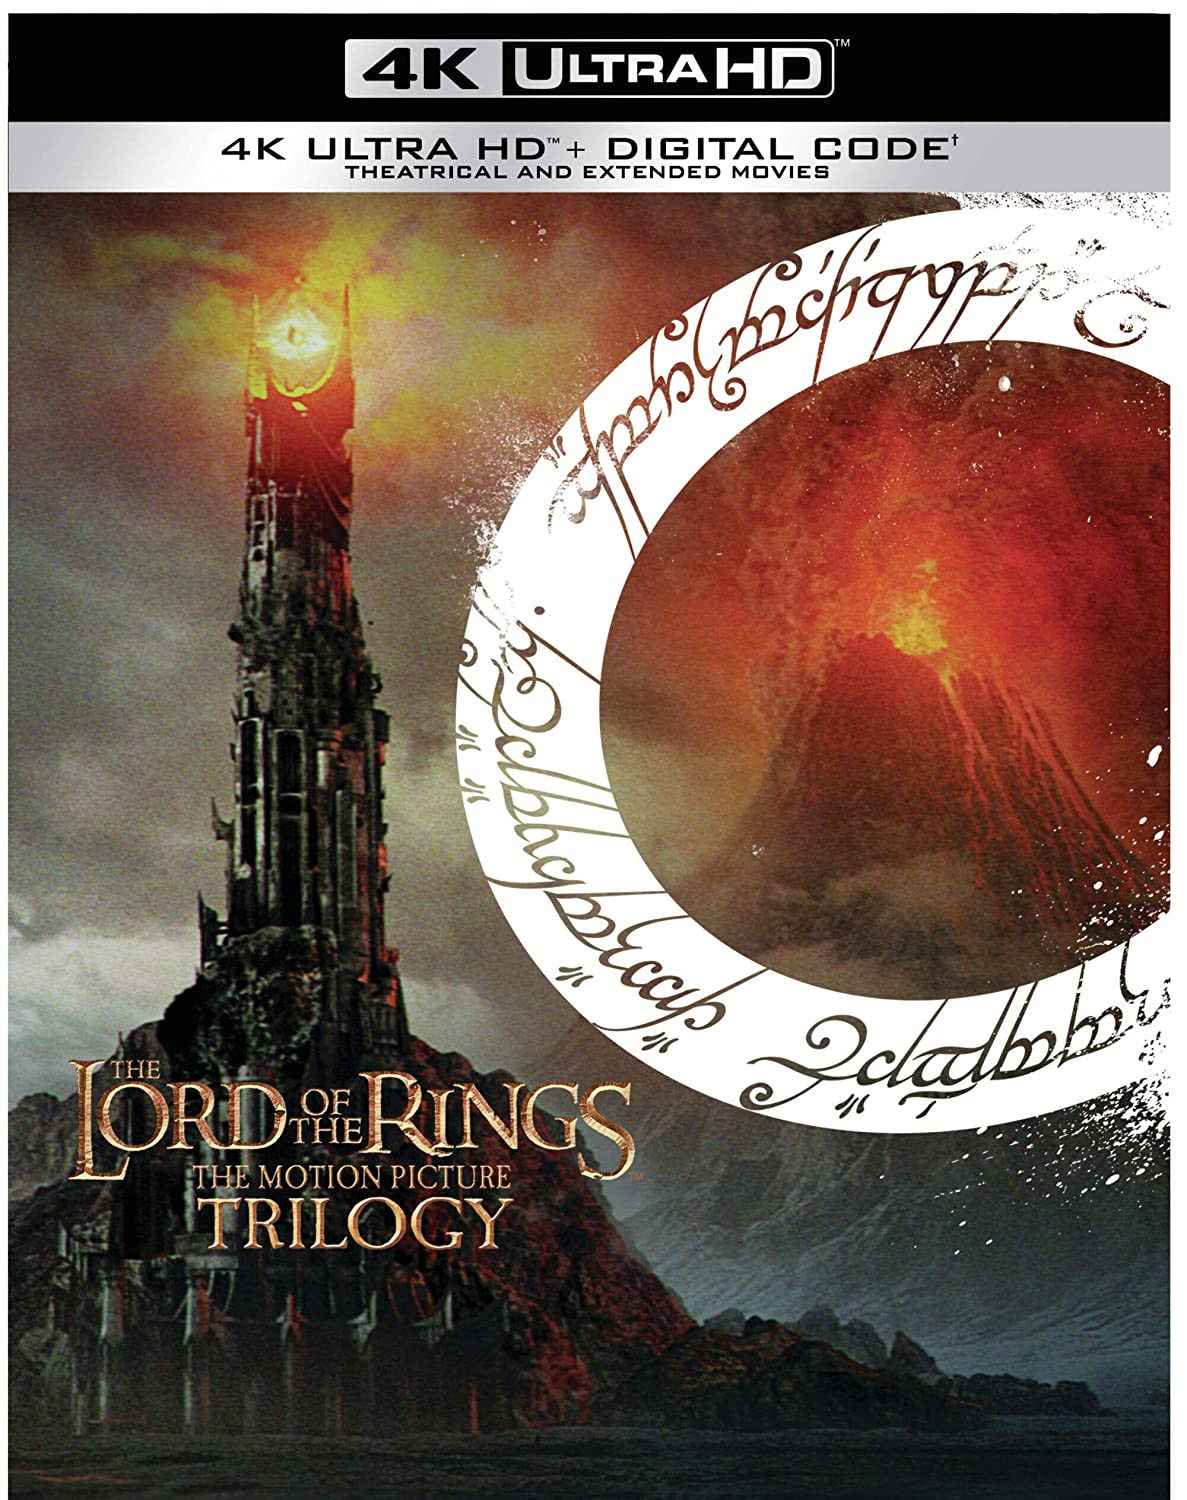 The Lord of the Rings: The Motion Picture Trilogy (Extended & Theatrical)(4K Ultra HD + Digital) - $51.26